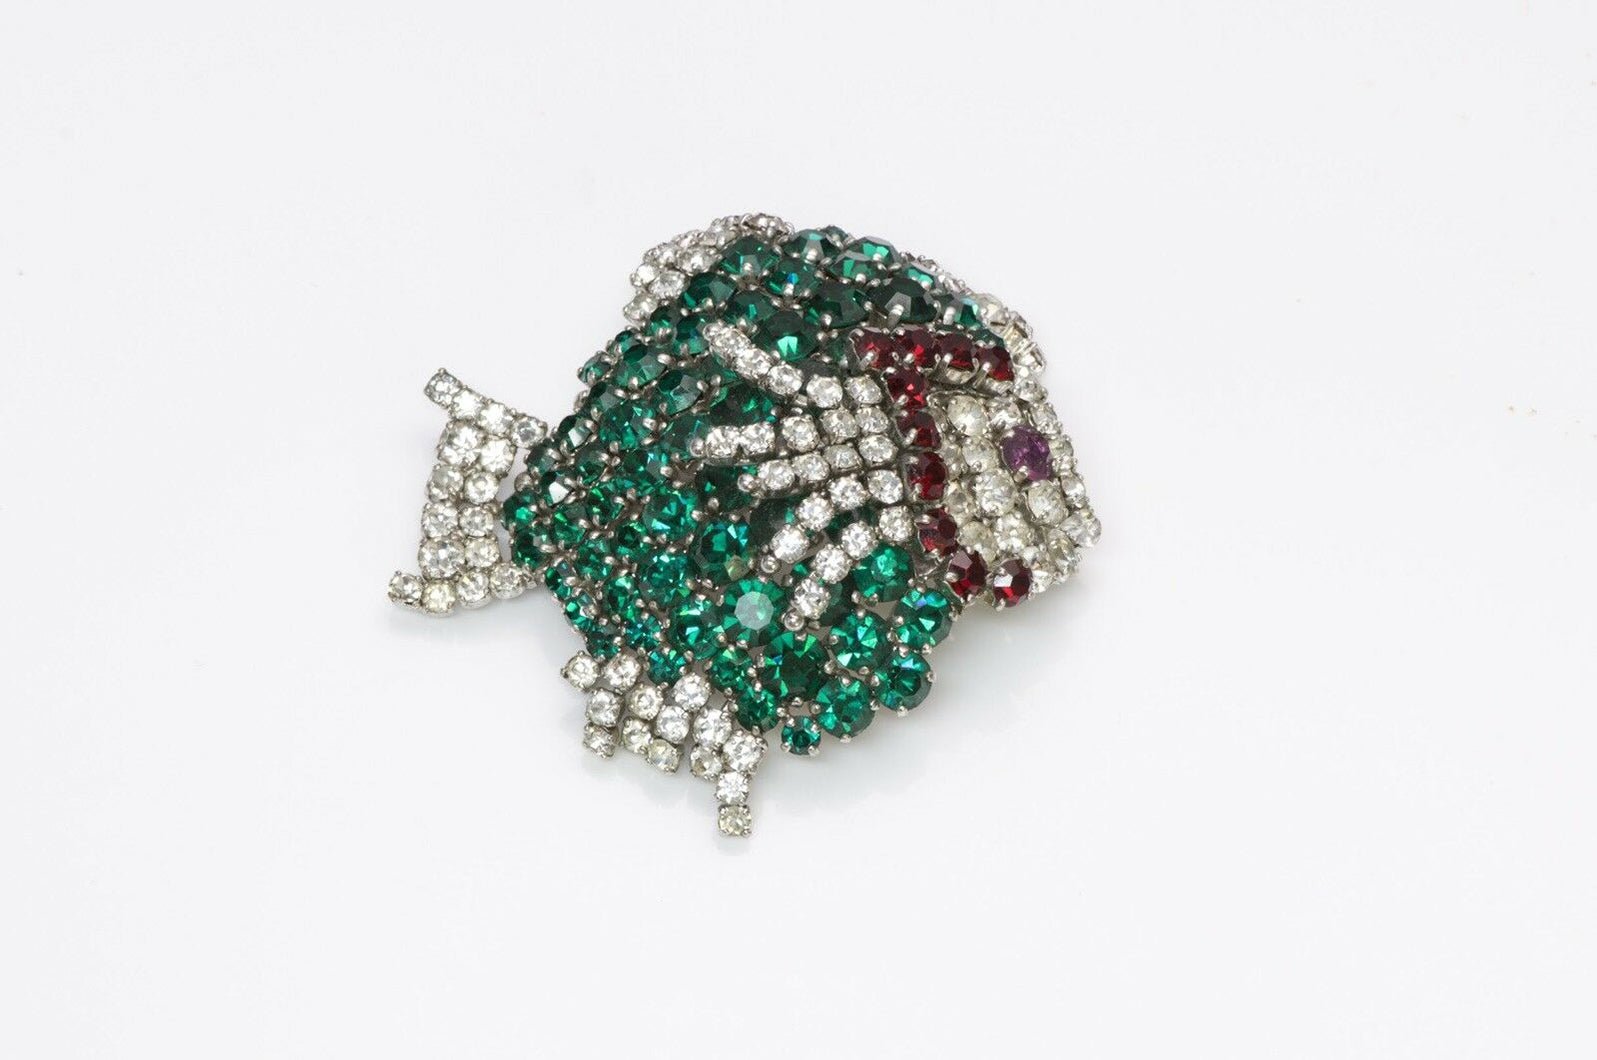 Christian Dior Henkel and Grosse 1961 Green Crystal Fish Brooch - DSF Antique Jewelry